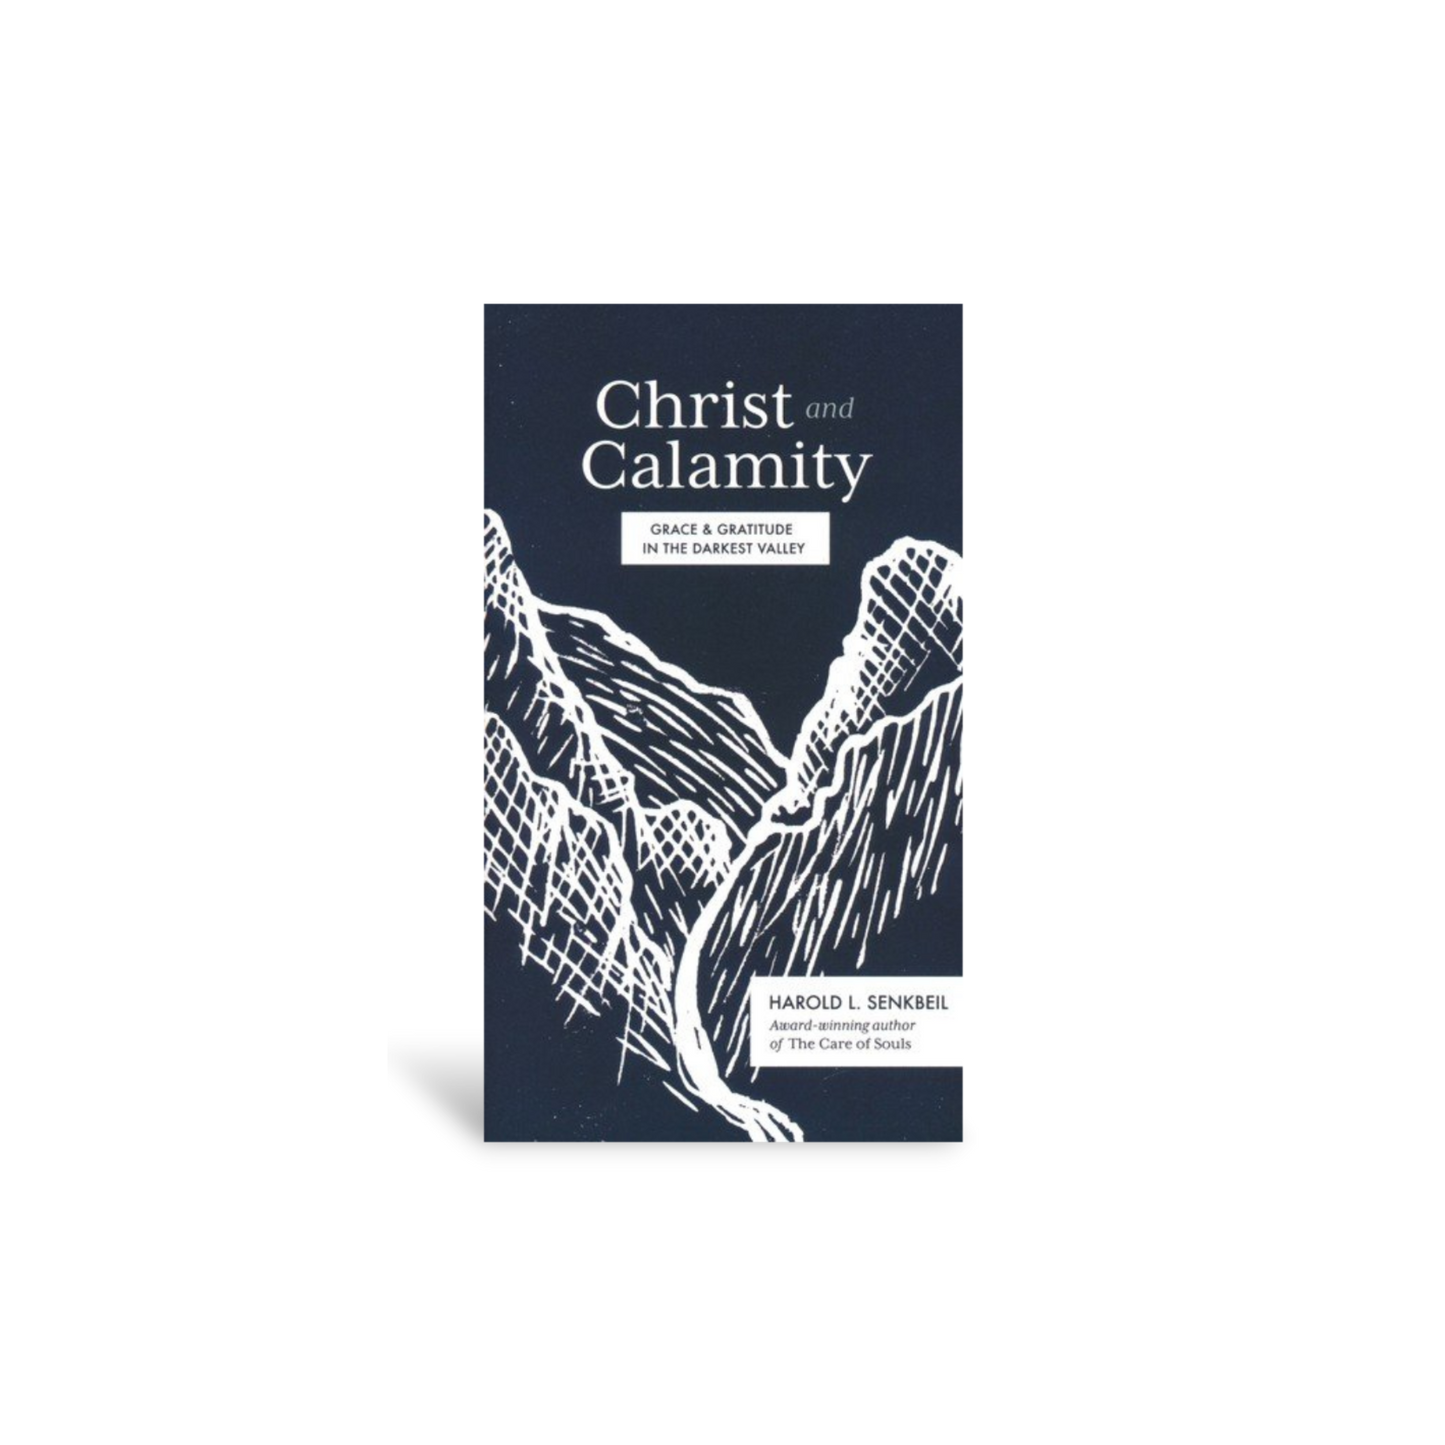 Christ and Calamity: Grace and Gratitude in the Darkest Valley